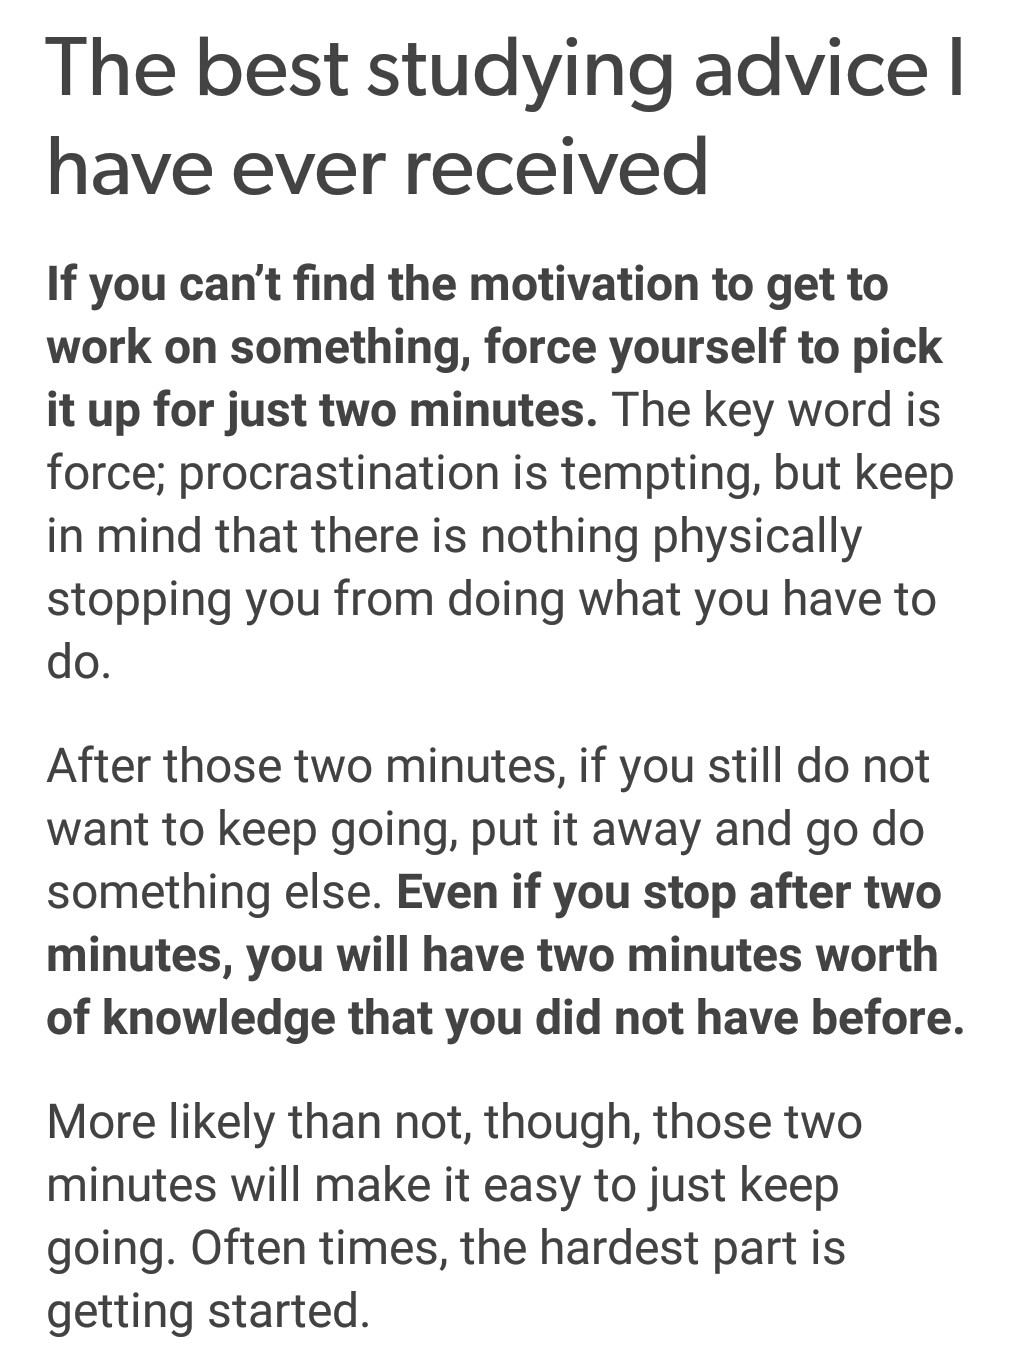 Motivational Quotes Reddit
 [Image] If you can t find the motivation GetMotivated